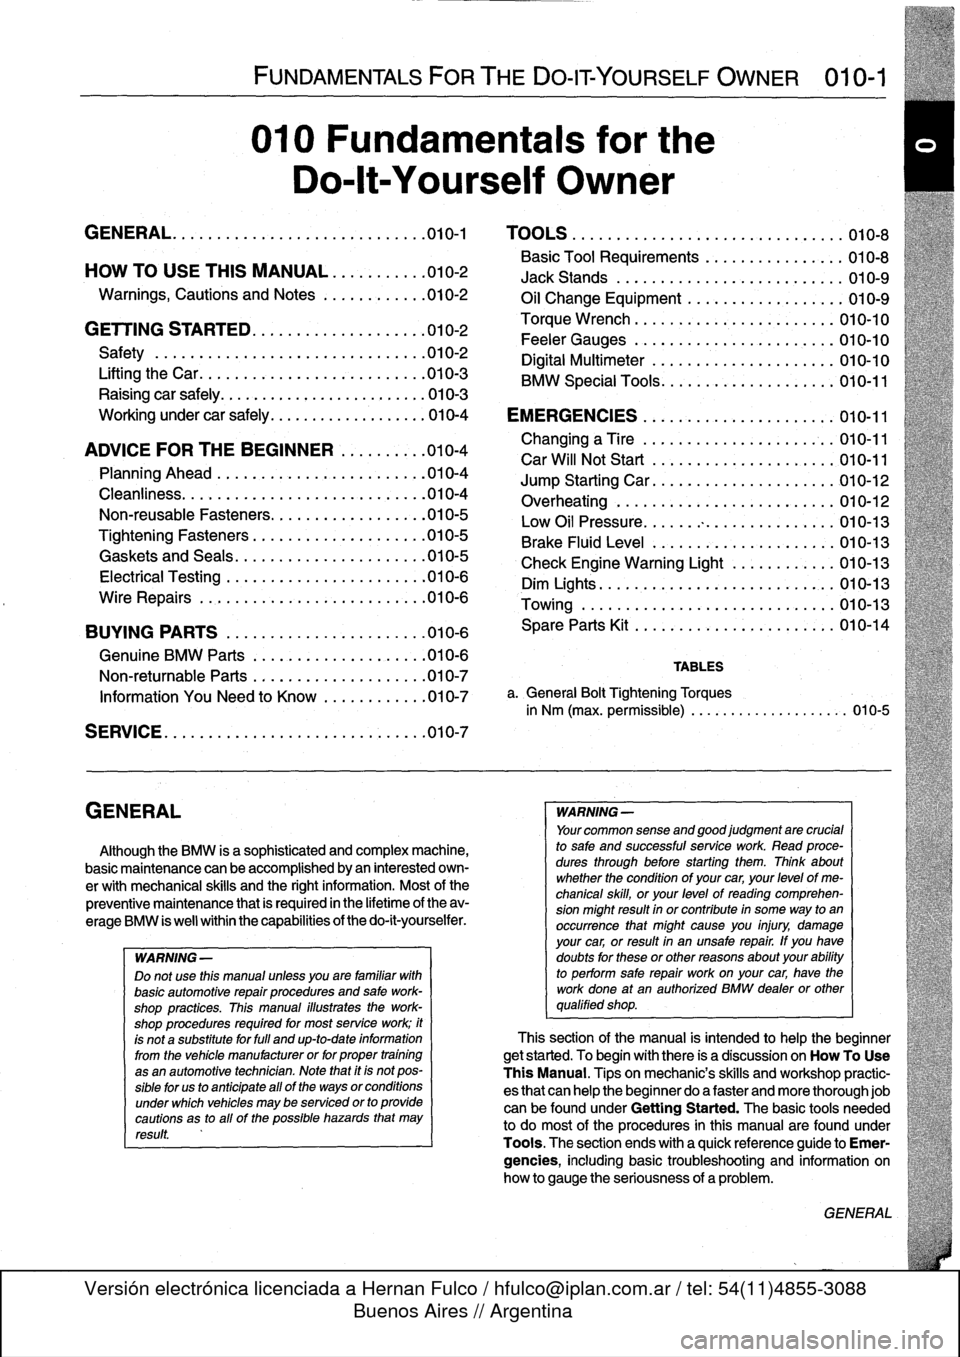 BMW 325i 1996 E36 Workshop Manual 
GENERAL

FUNDAMENTALS
FORTHE
DO-IT
YOURSELF
OWNER

	

010-1

010
Fundamentals
for
the

Do-lt-Yourself
Owner

GENERAL
.......
.
.
.
......
.
.........
.
.
.010-1

	

TOOLS
.
.
...
.
............
.
...